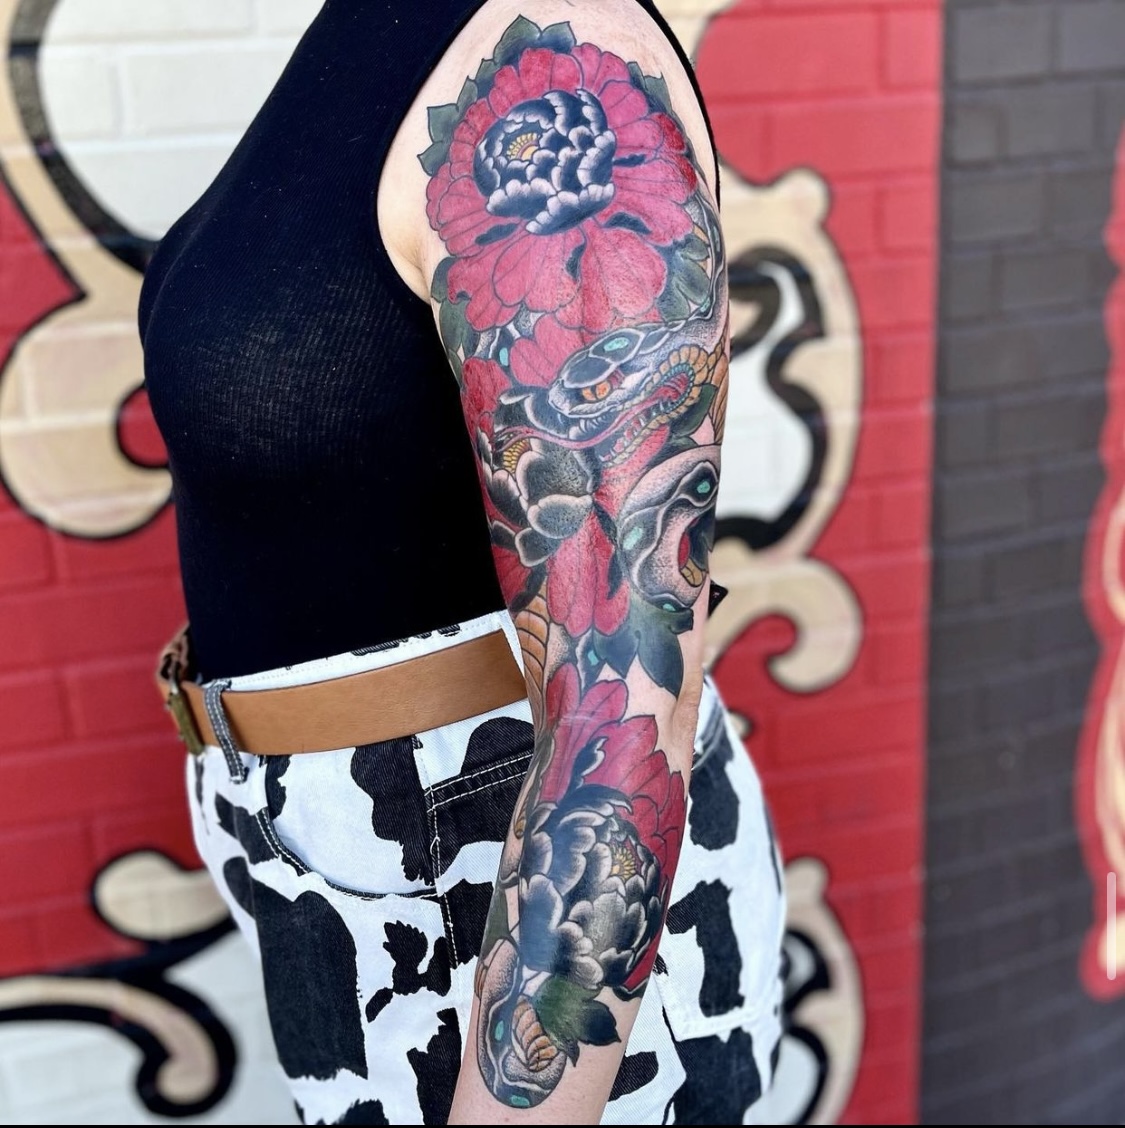 Large flower tattoo on a woman's arm from Dallas tattoo artist